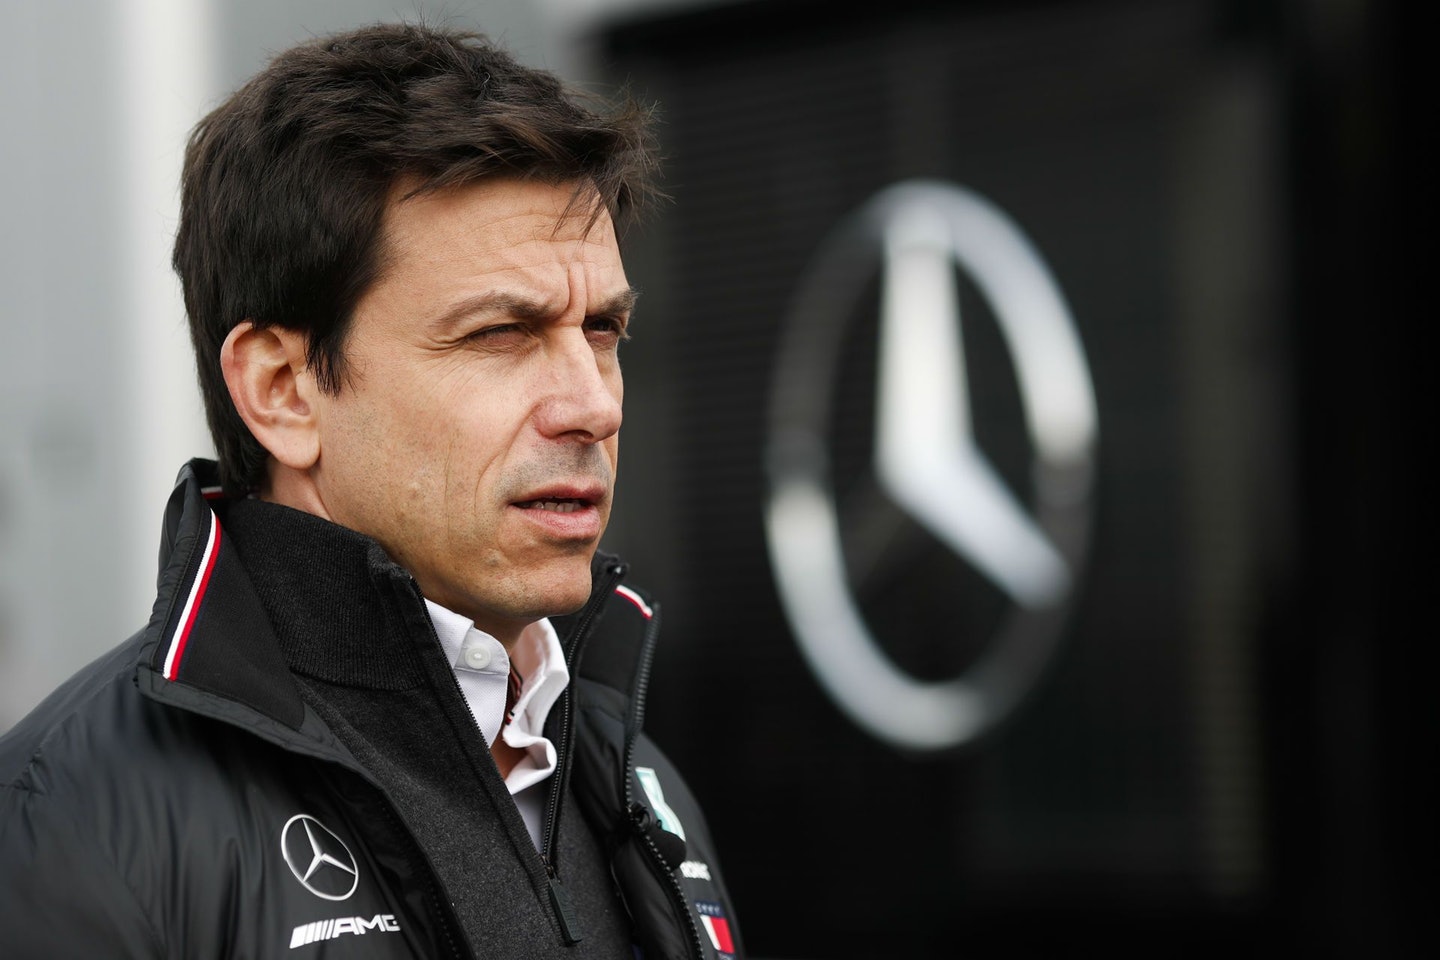 Toto Wolff is quite aware that the USA is Mercedes' largest passenger car market